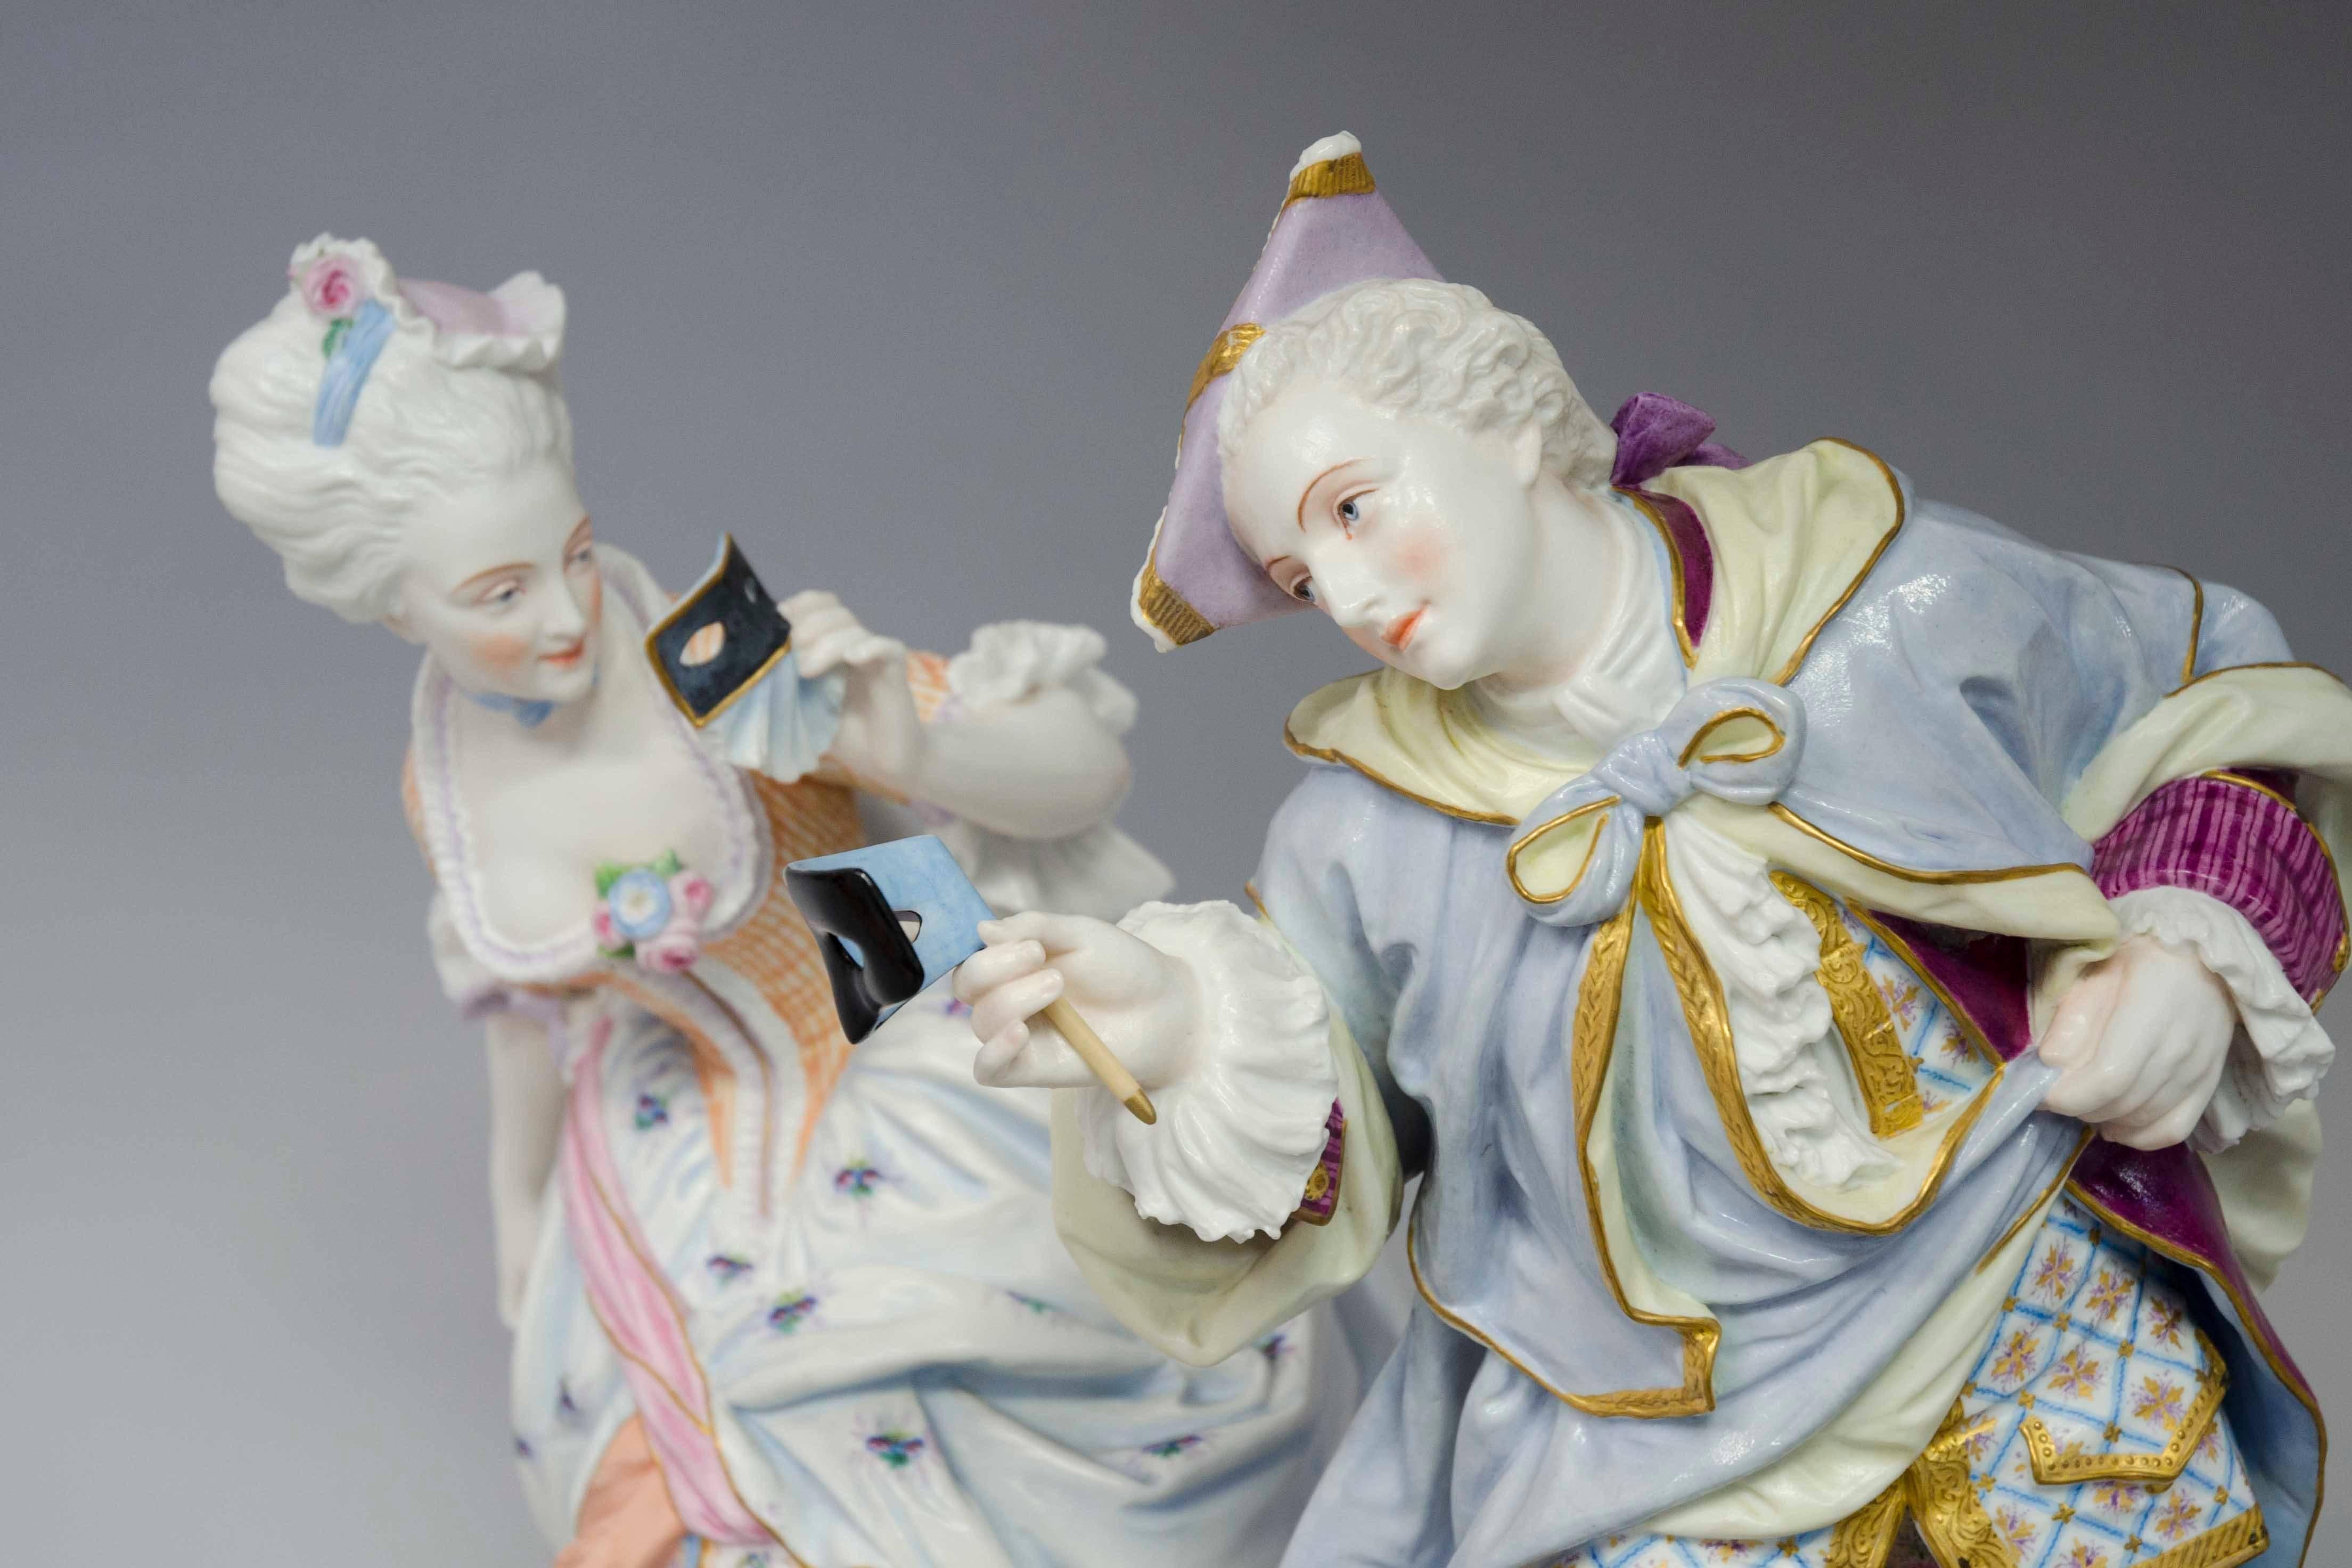 A pair of large bisque 18th century court figures at a masked ball. Both are elegantly bowing and making amorous gestures. The base is also decorated. Inspired by the traditional Venice carnaval. Second part of the 19th century, raised blue pad with